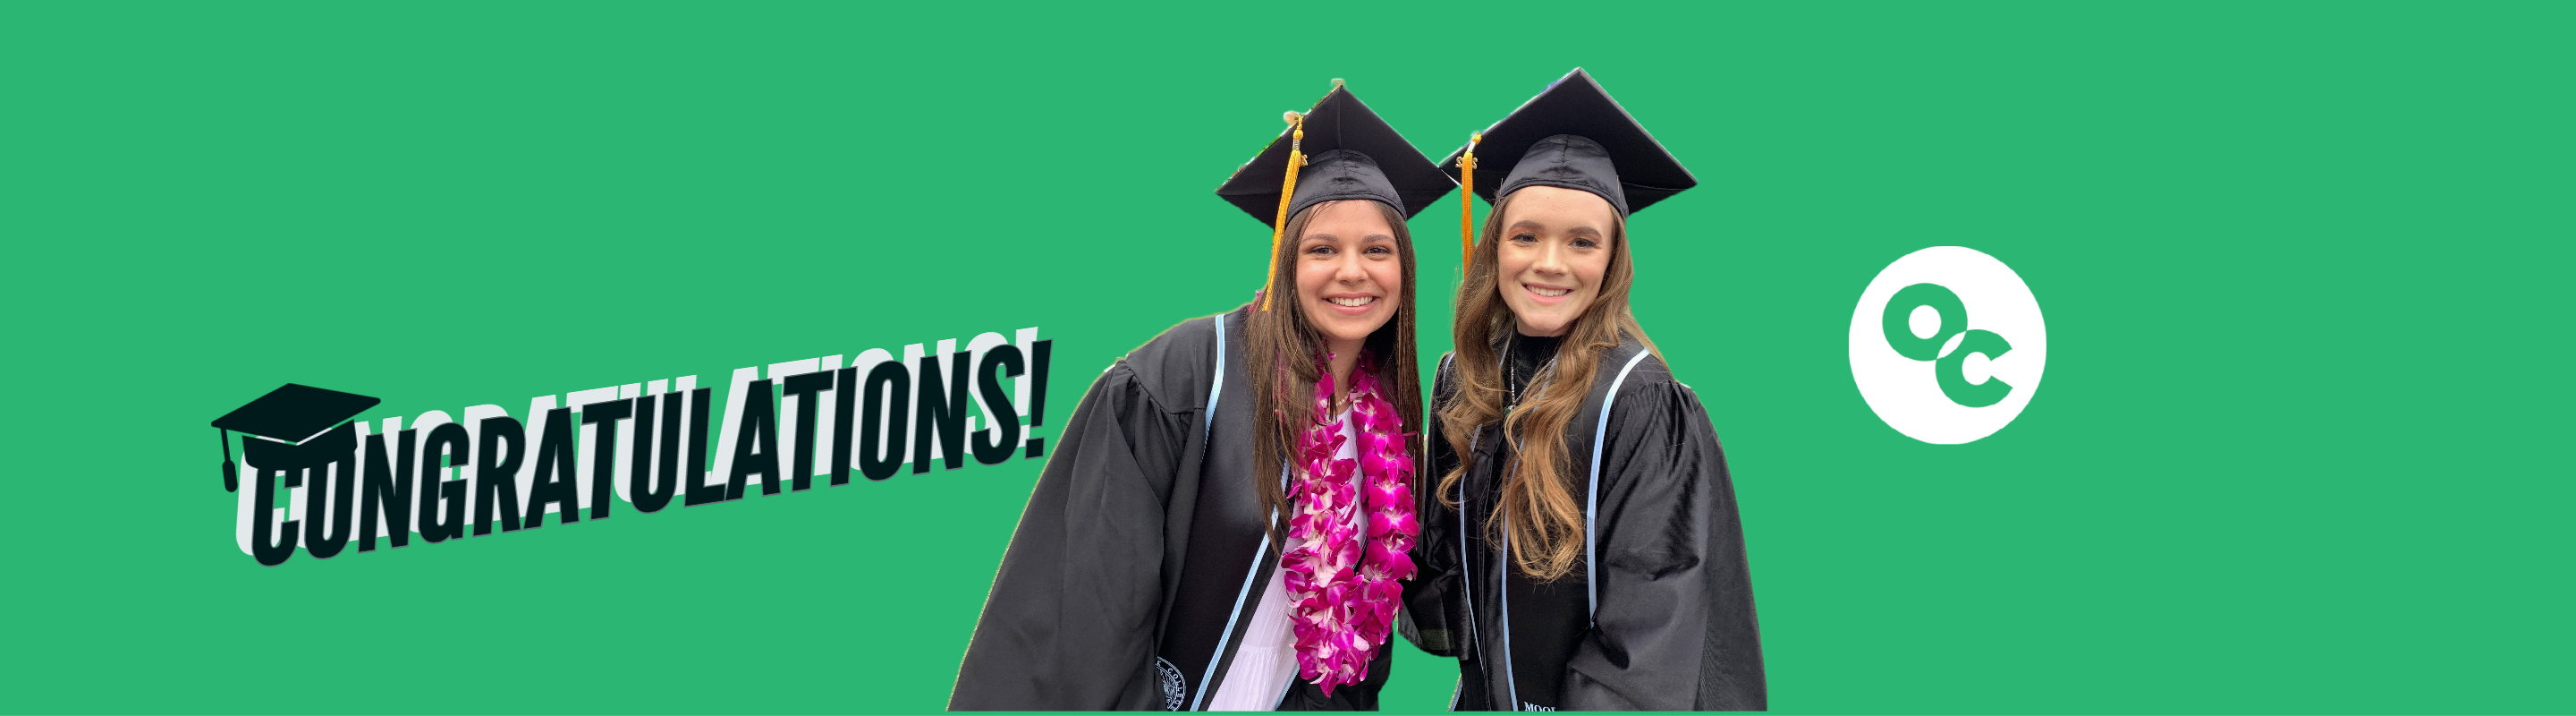 Two female graduates on a green background. Text that reads: Congratulations!